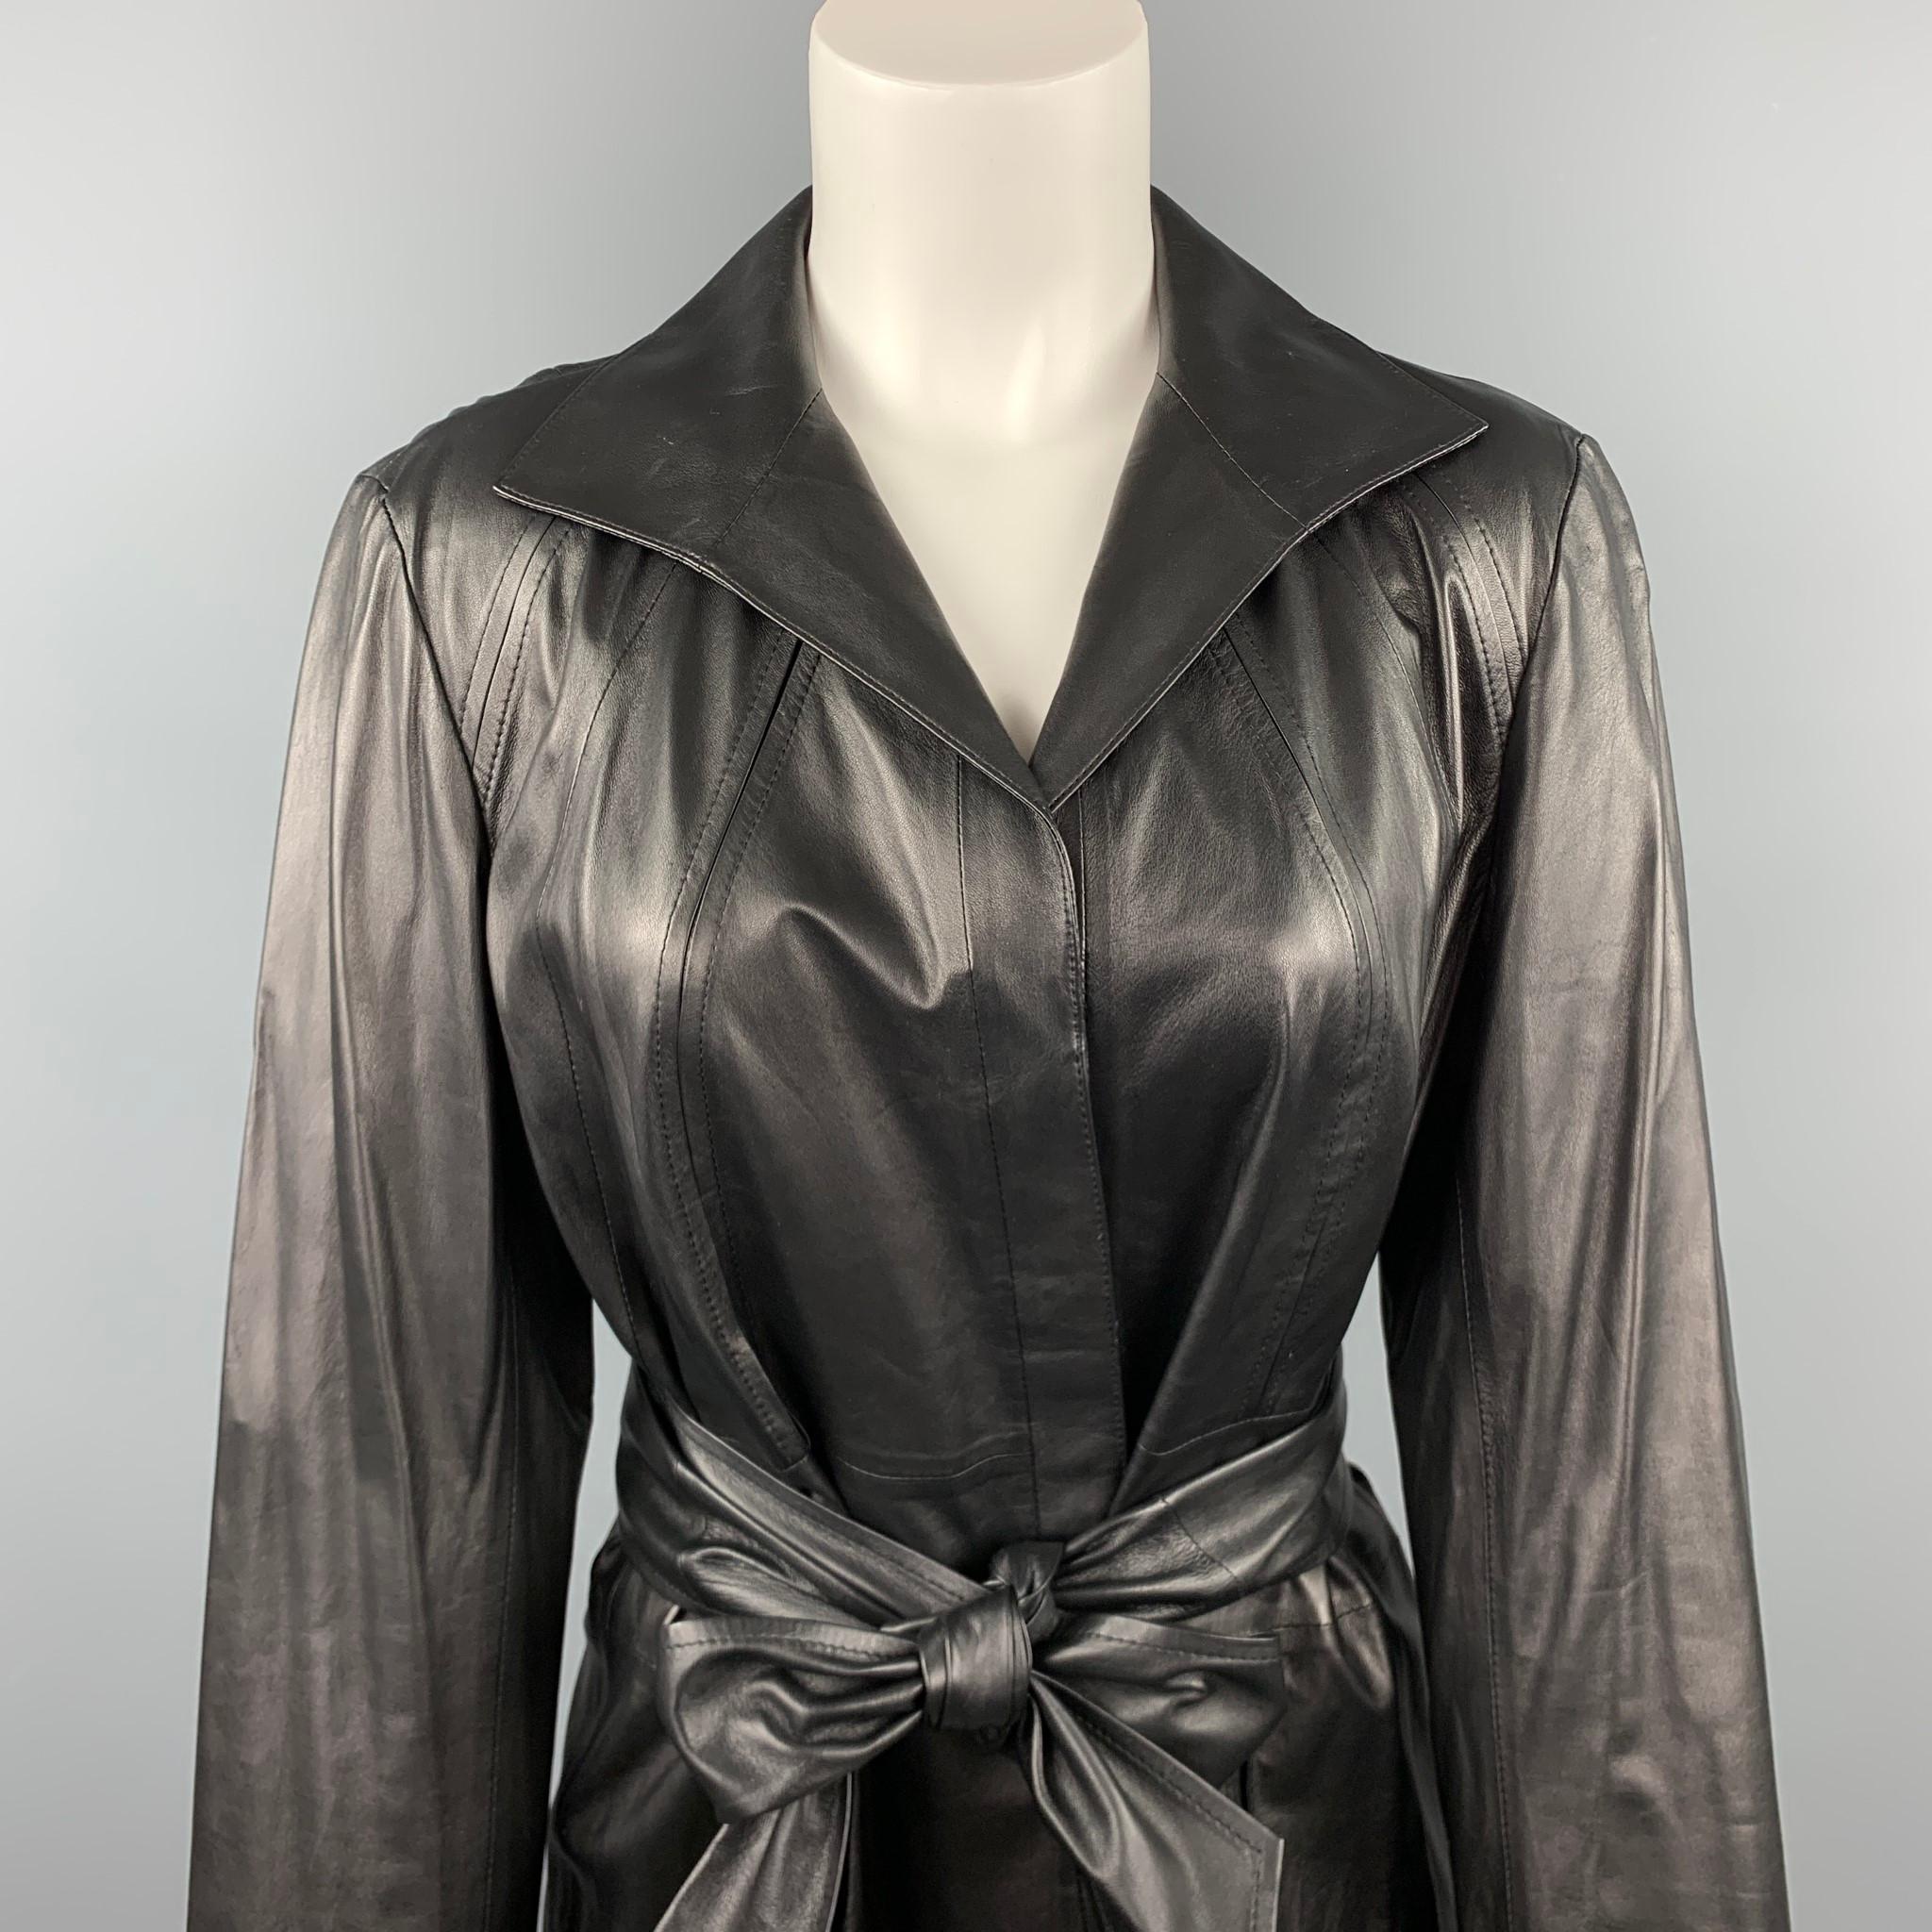 LAFAYETTE 148 jacket comes in a black leather featuring a belted style, top stitching, spread collar, and a hidden button closure. 

Very Good Pre-Owned Condition.
Marked: 10
Original Retail Price: $998.00

Measurements:

Shoulder: 17 in. 
Bust: 37